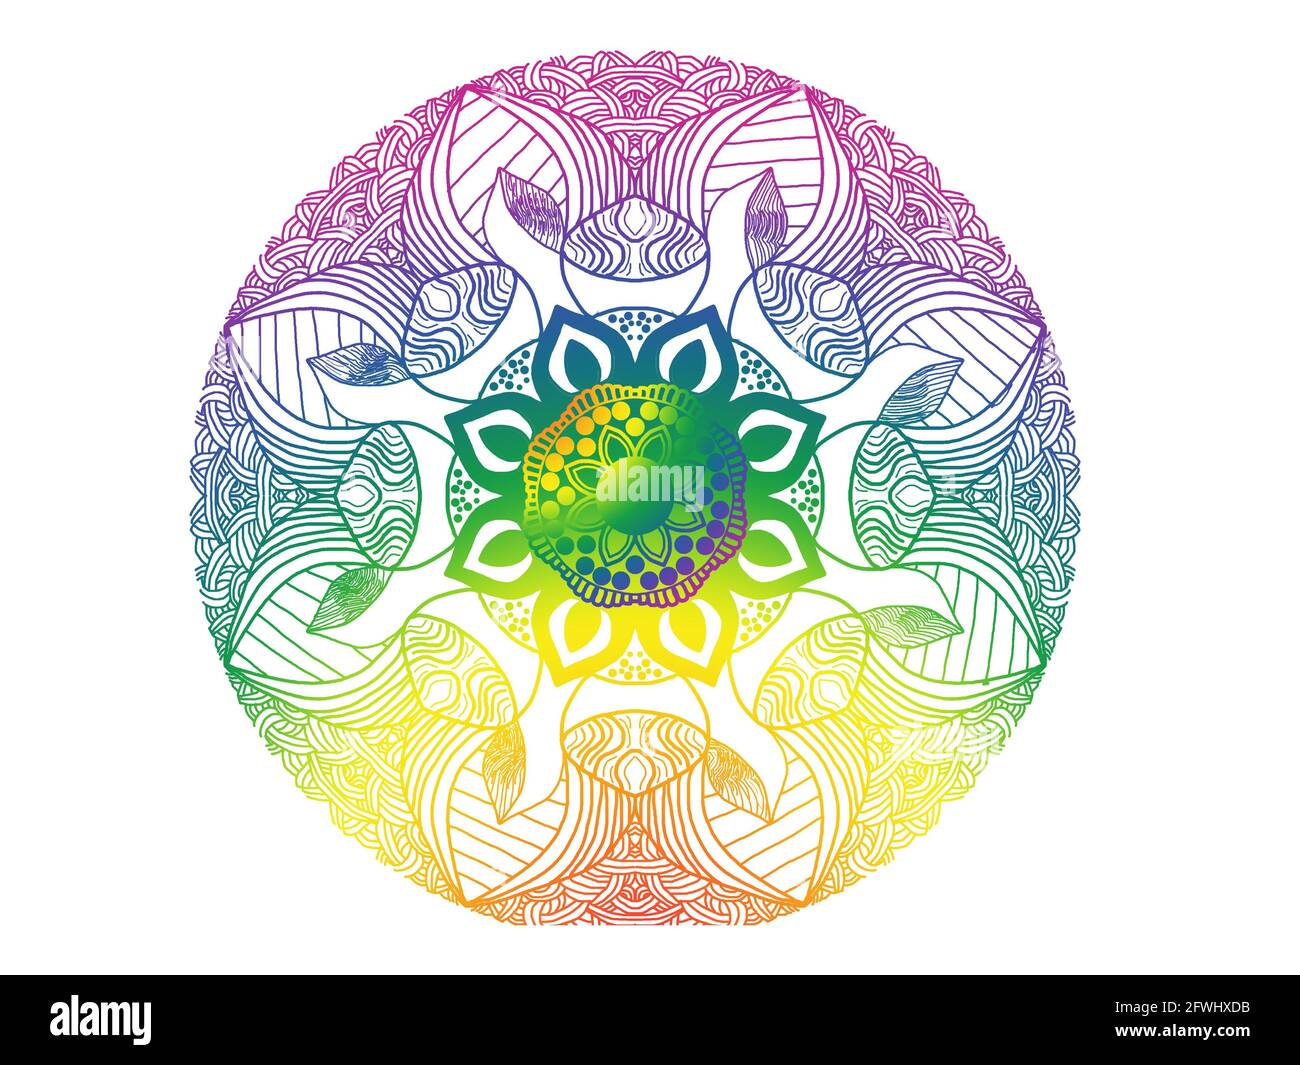 Hand drawn mandala design with rainbow pride colors on white background. Great for festival, wallpaper, desktop. Stock Photo